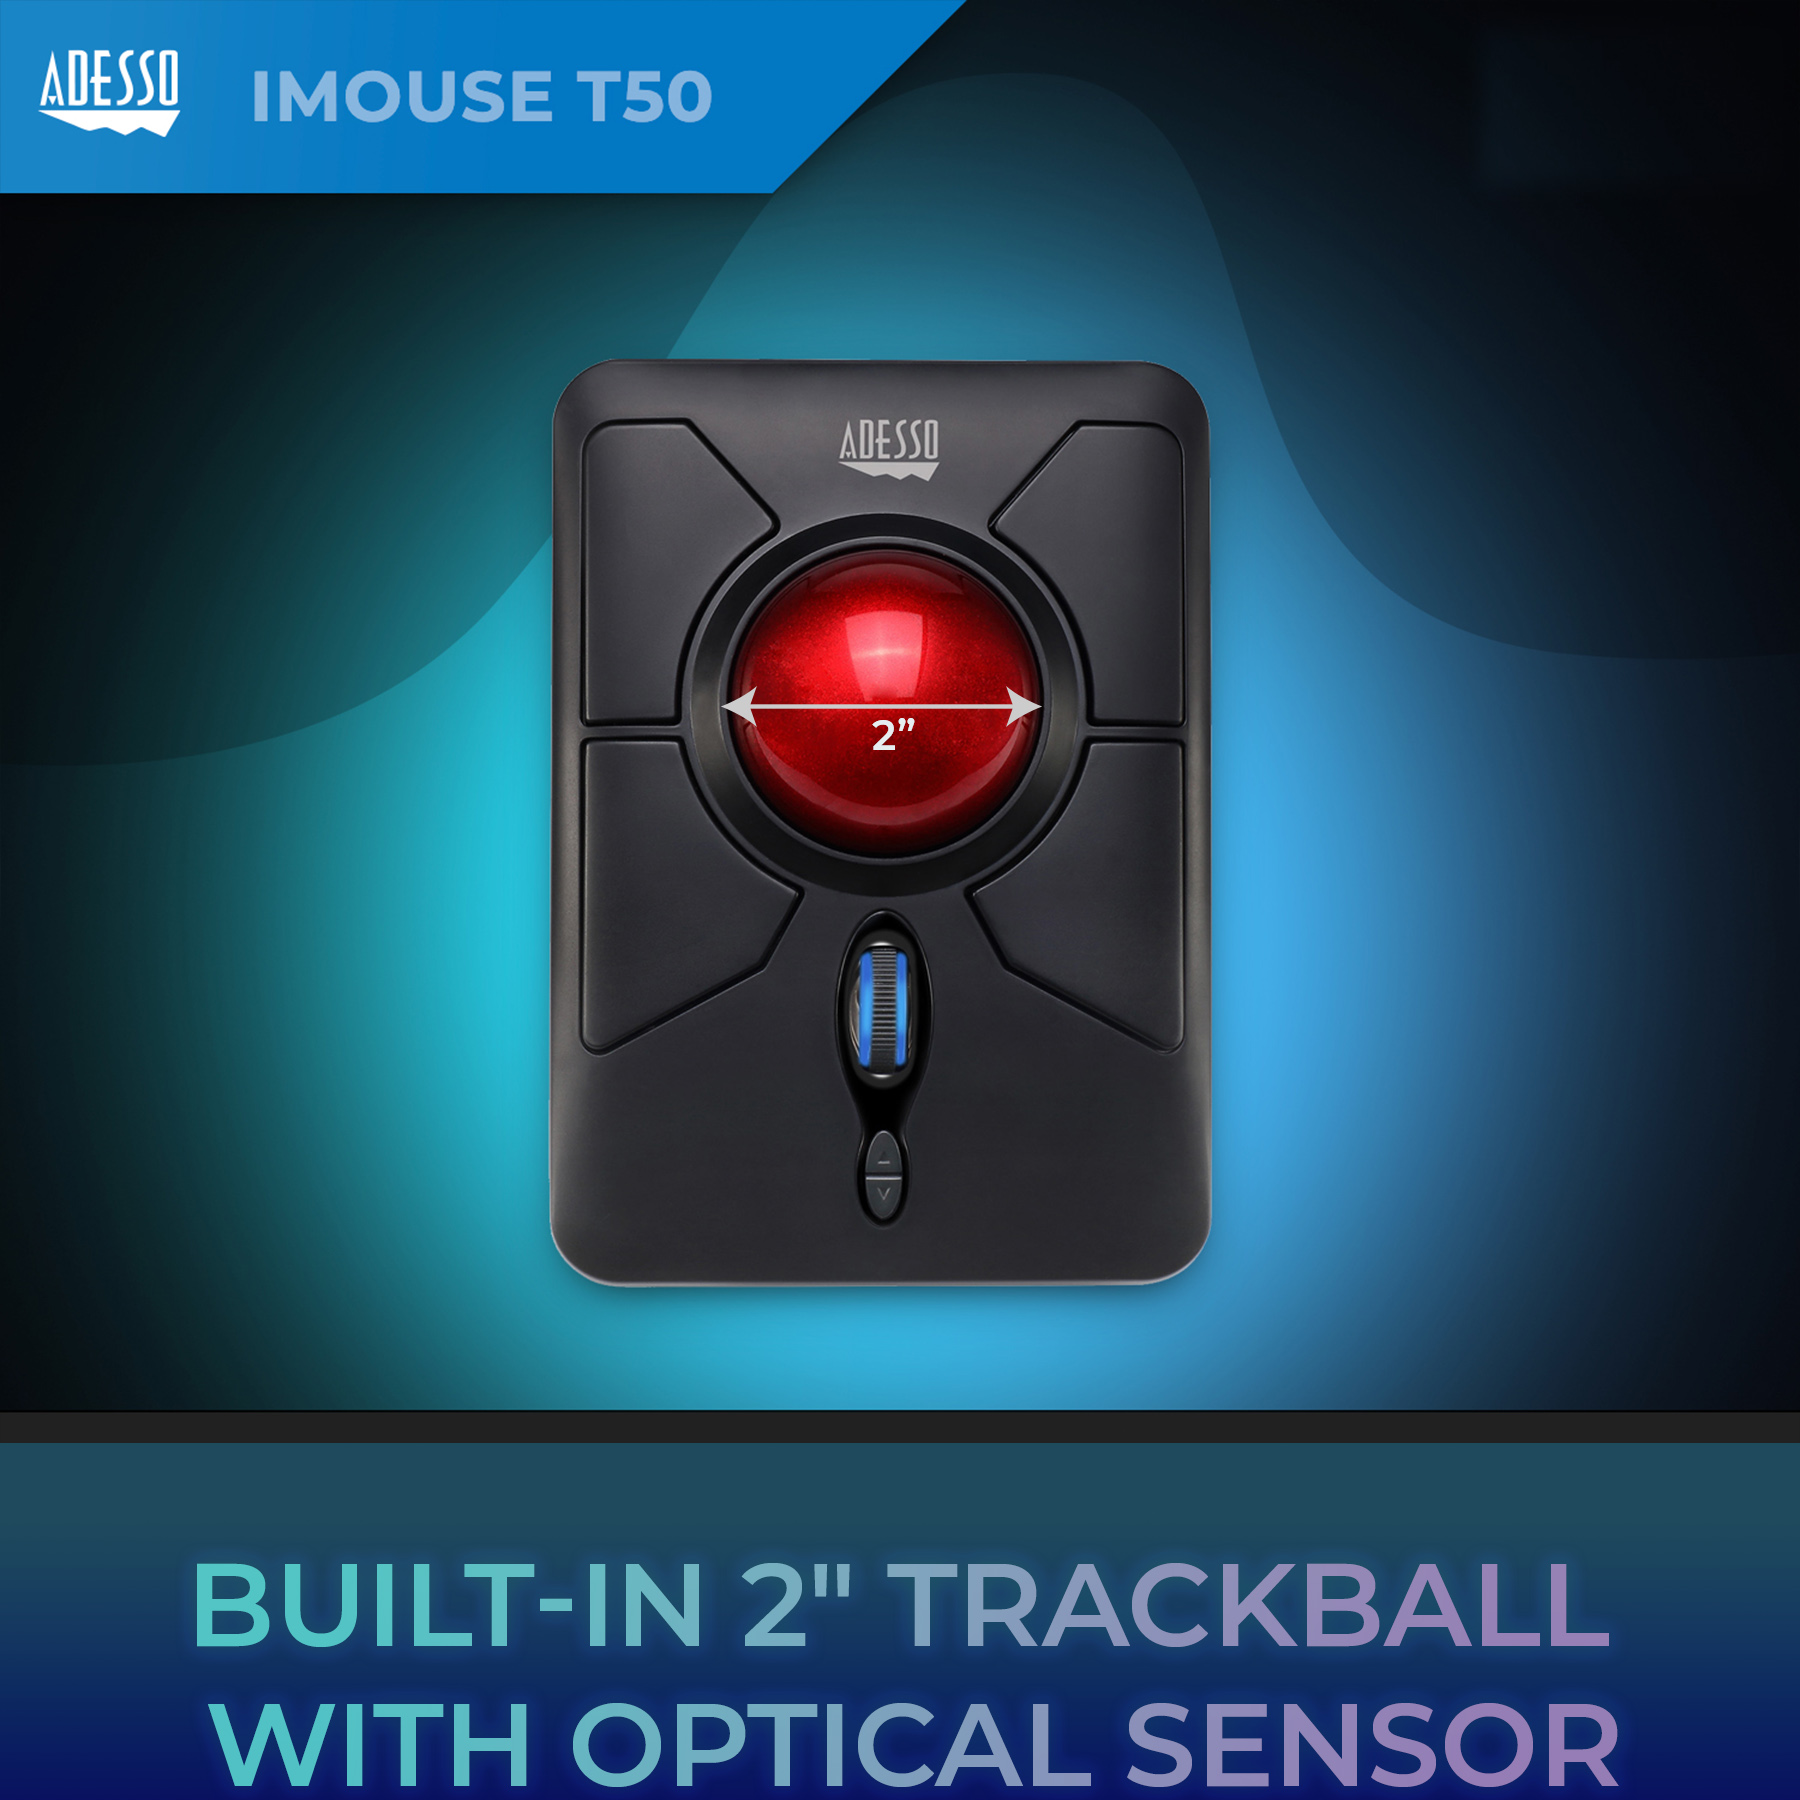 iMouse T50 Built-in 2 inTrackball copy